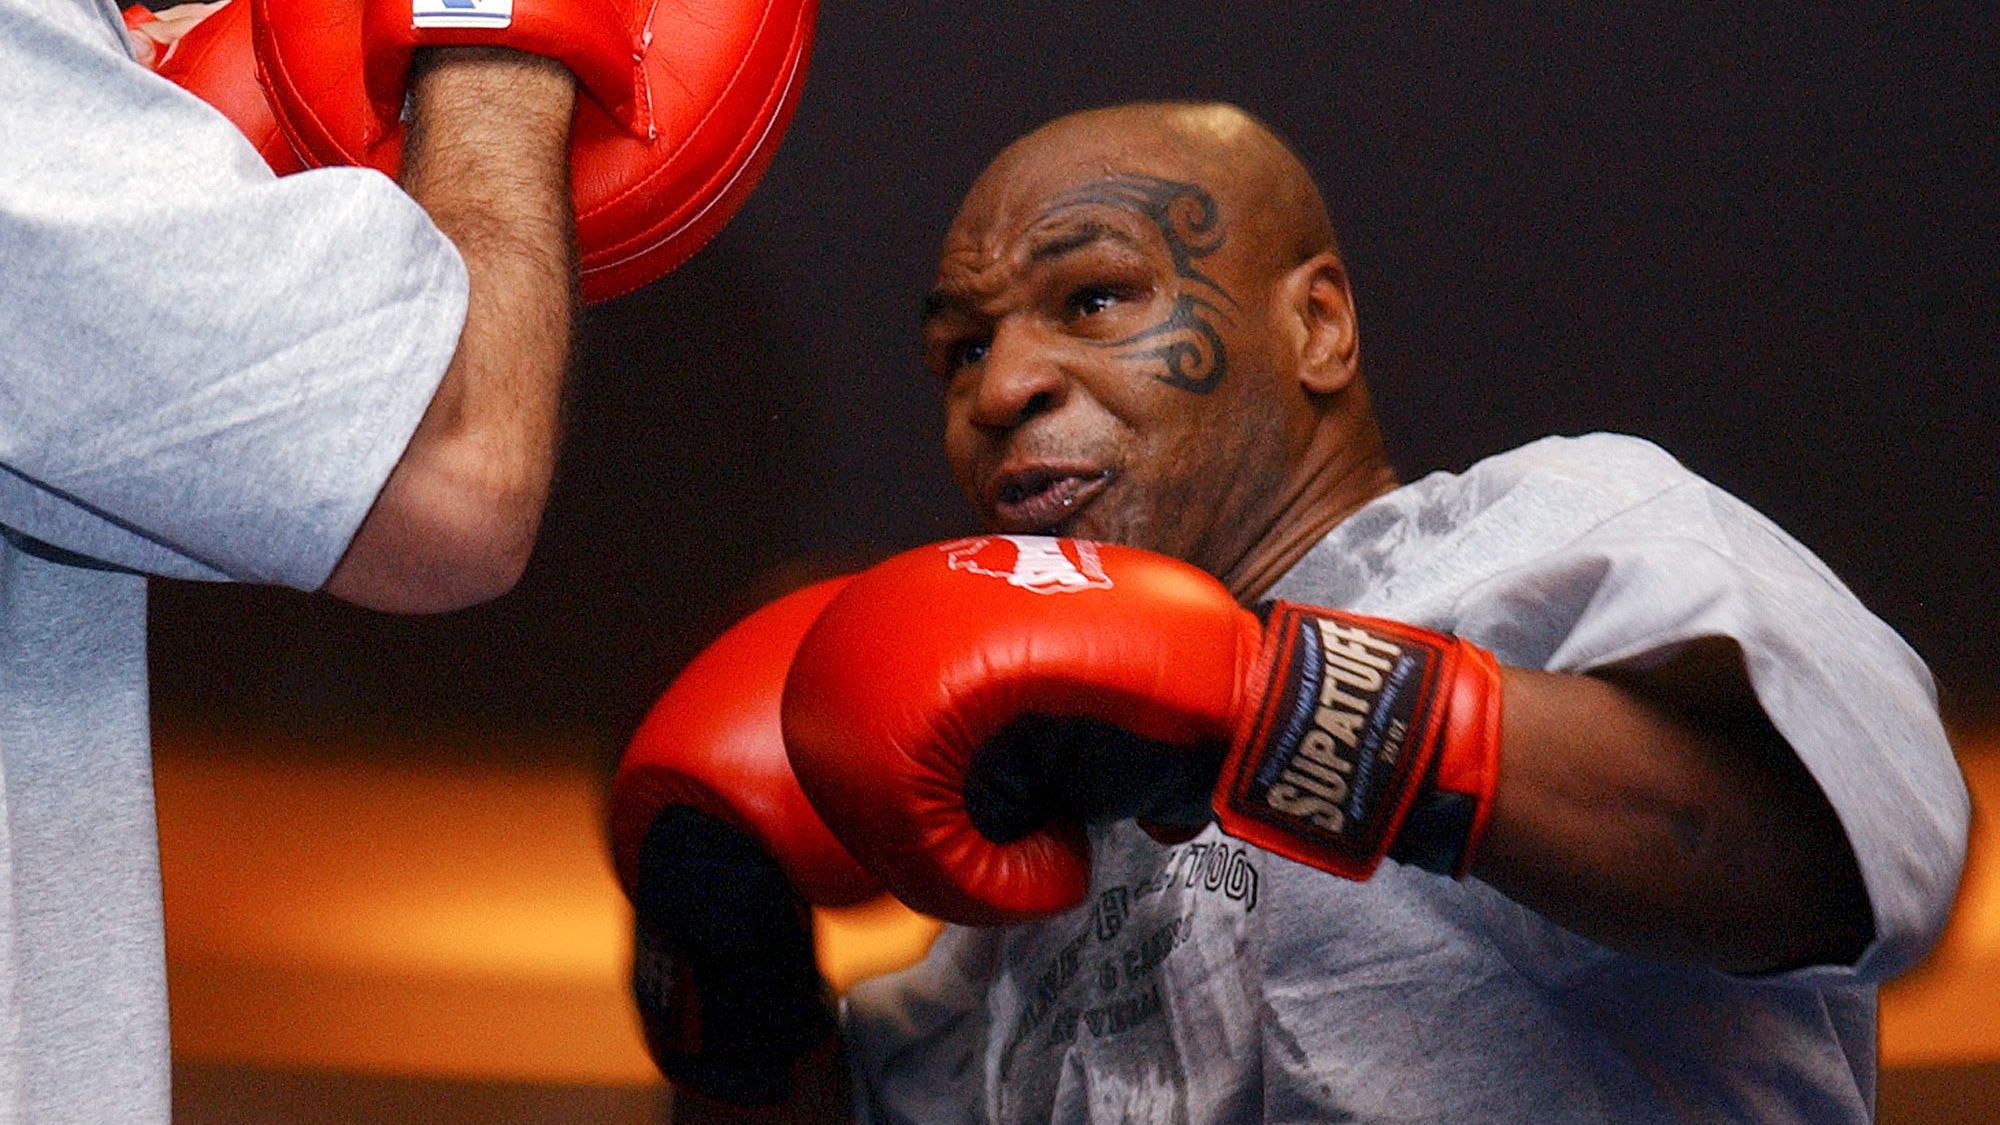 Former heavyweight champ Mike Tyson in Capital Region for MMA ringside commentary